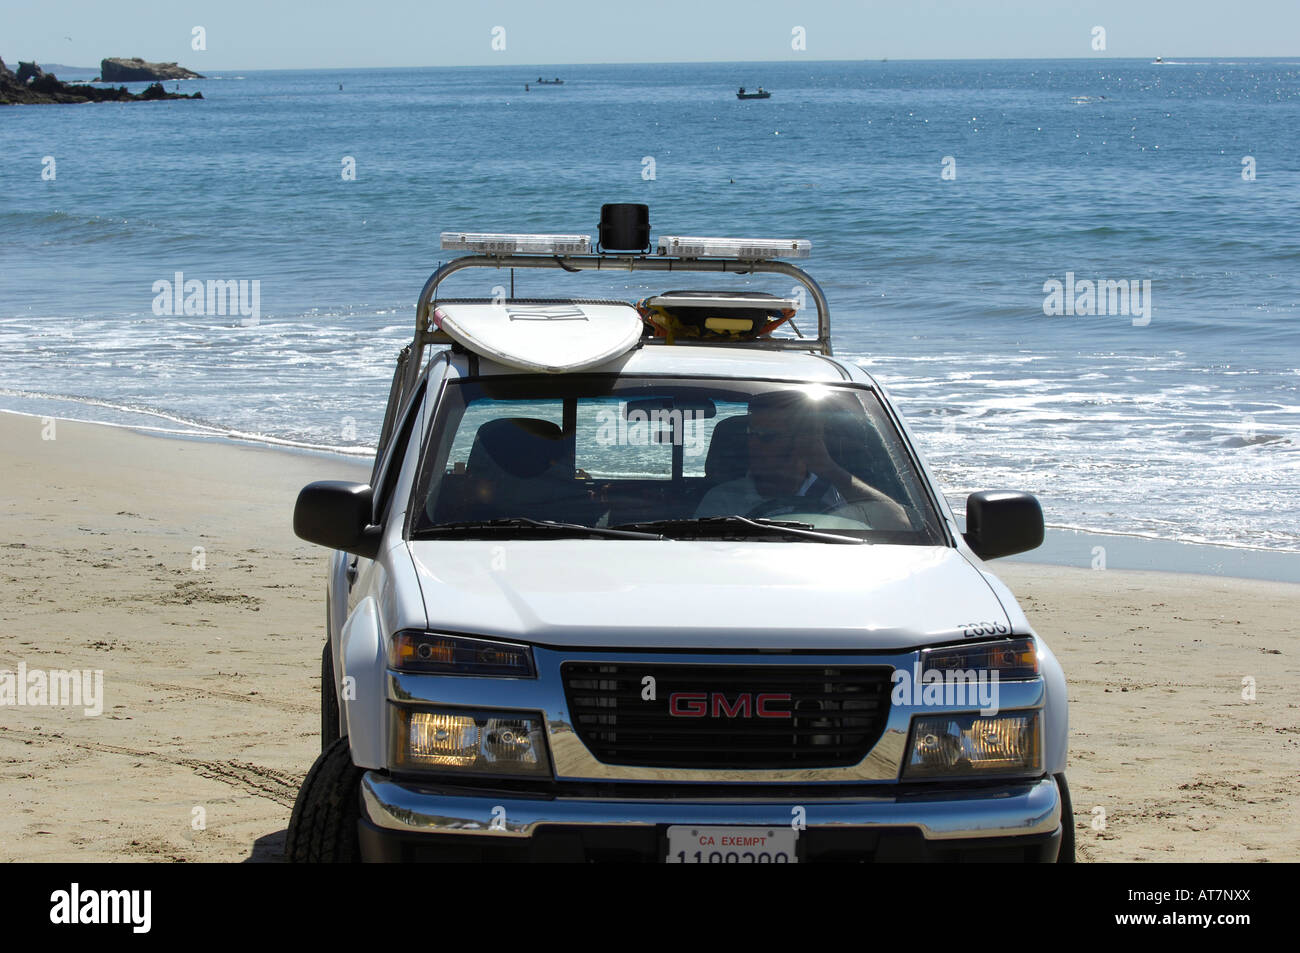 LED lights on an emergency vehicle allow first responders to be highly visible, Lifeguard rescue truck with surf board. Stock Photo